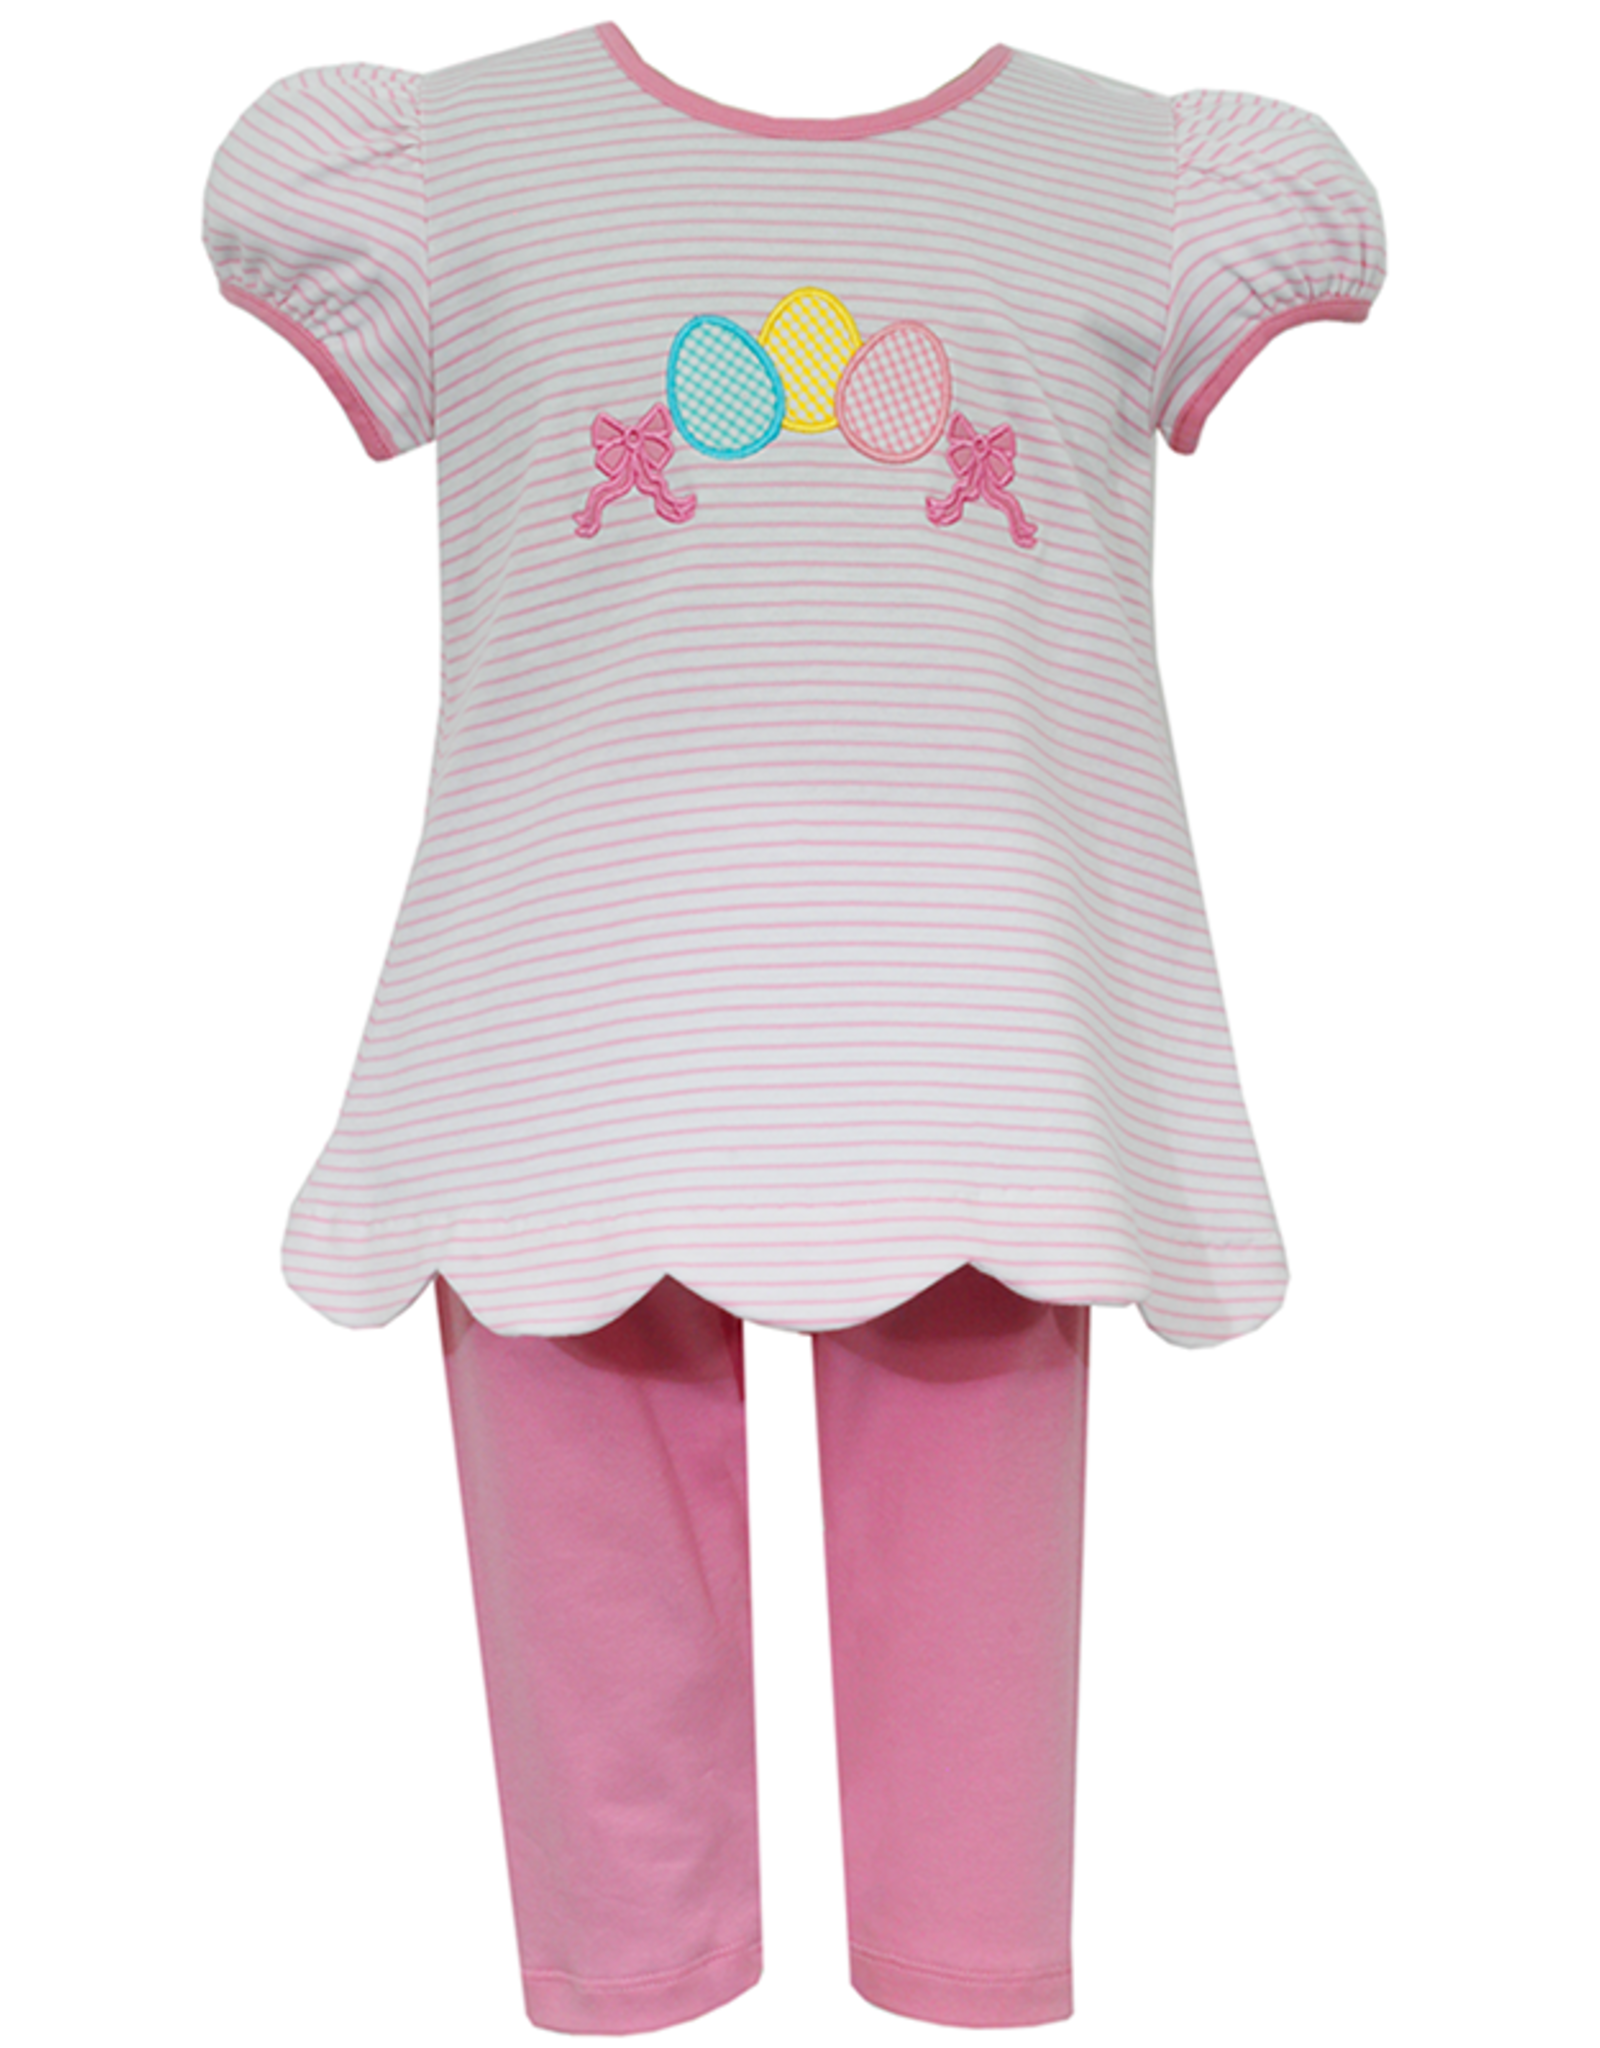 Claire and Charlie 5004N Pink Eggs Tunic/Legging Set